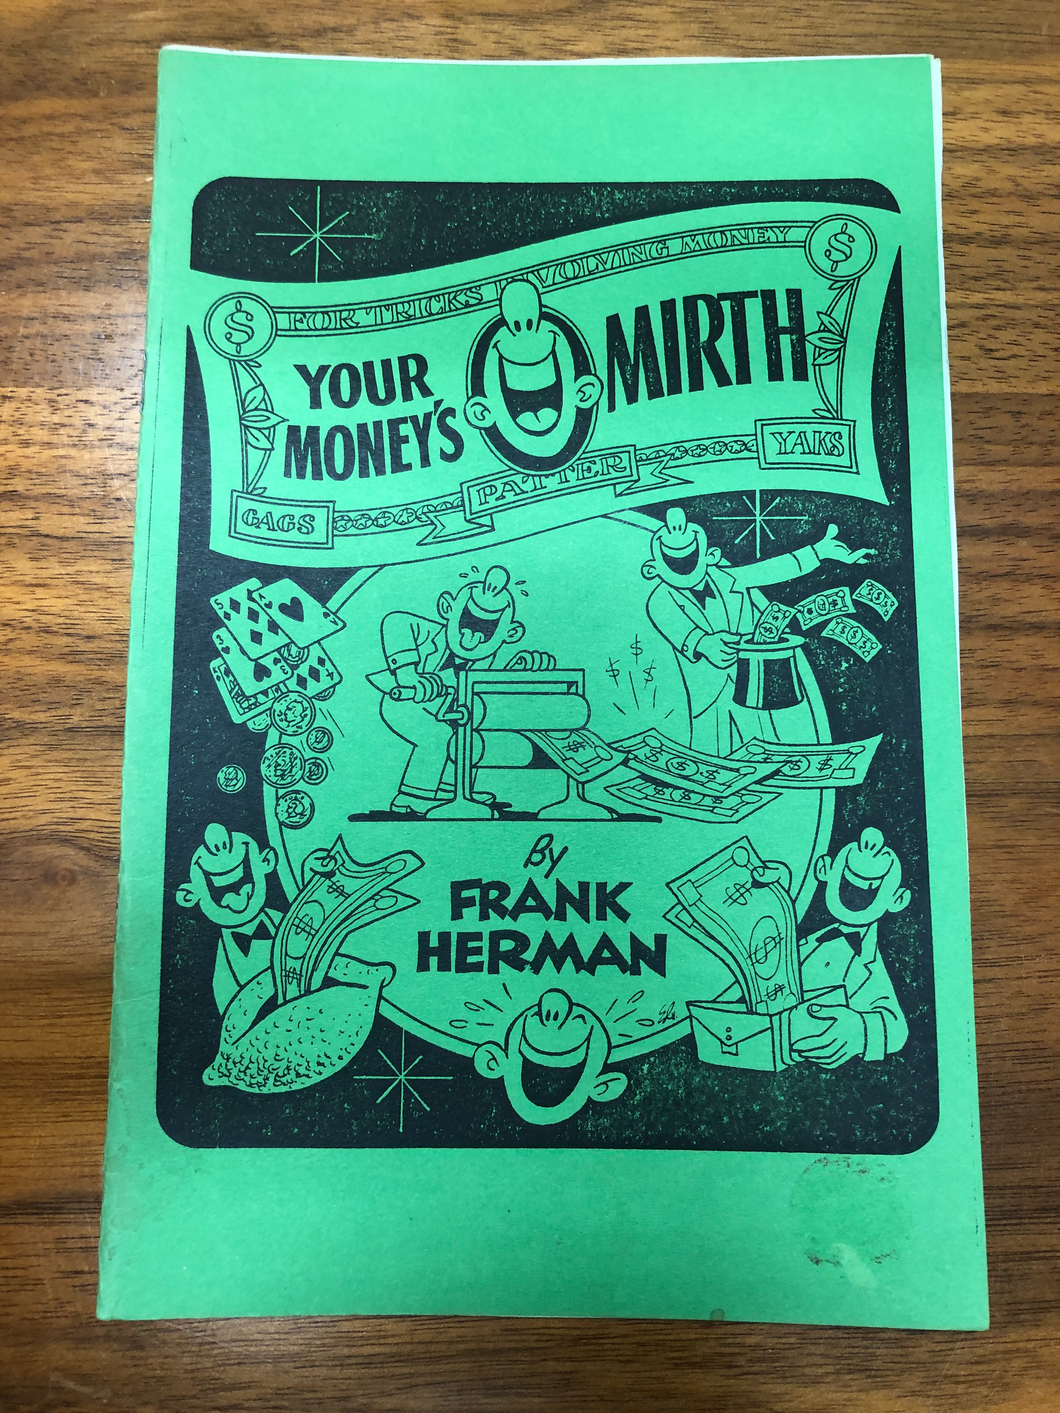 Your Money's Mirth by Frank Herman